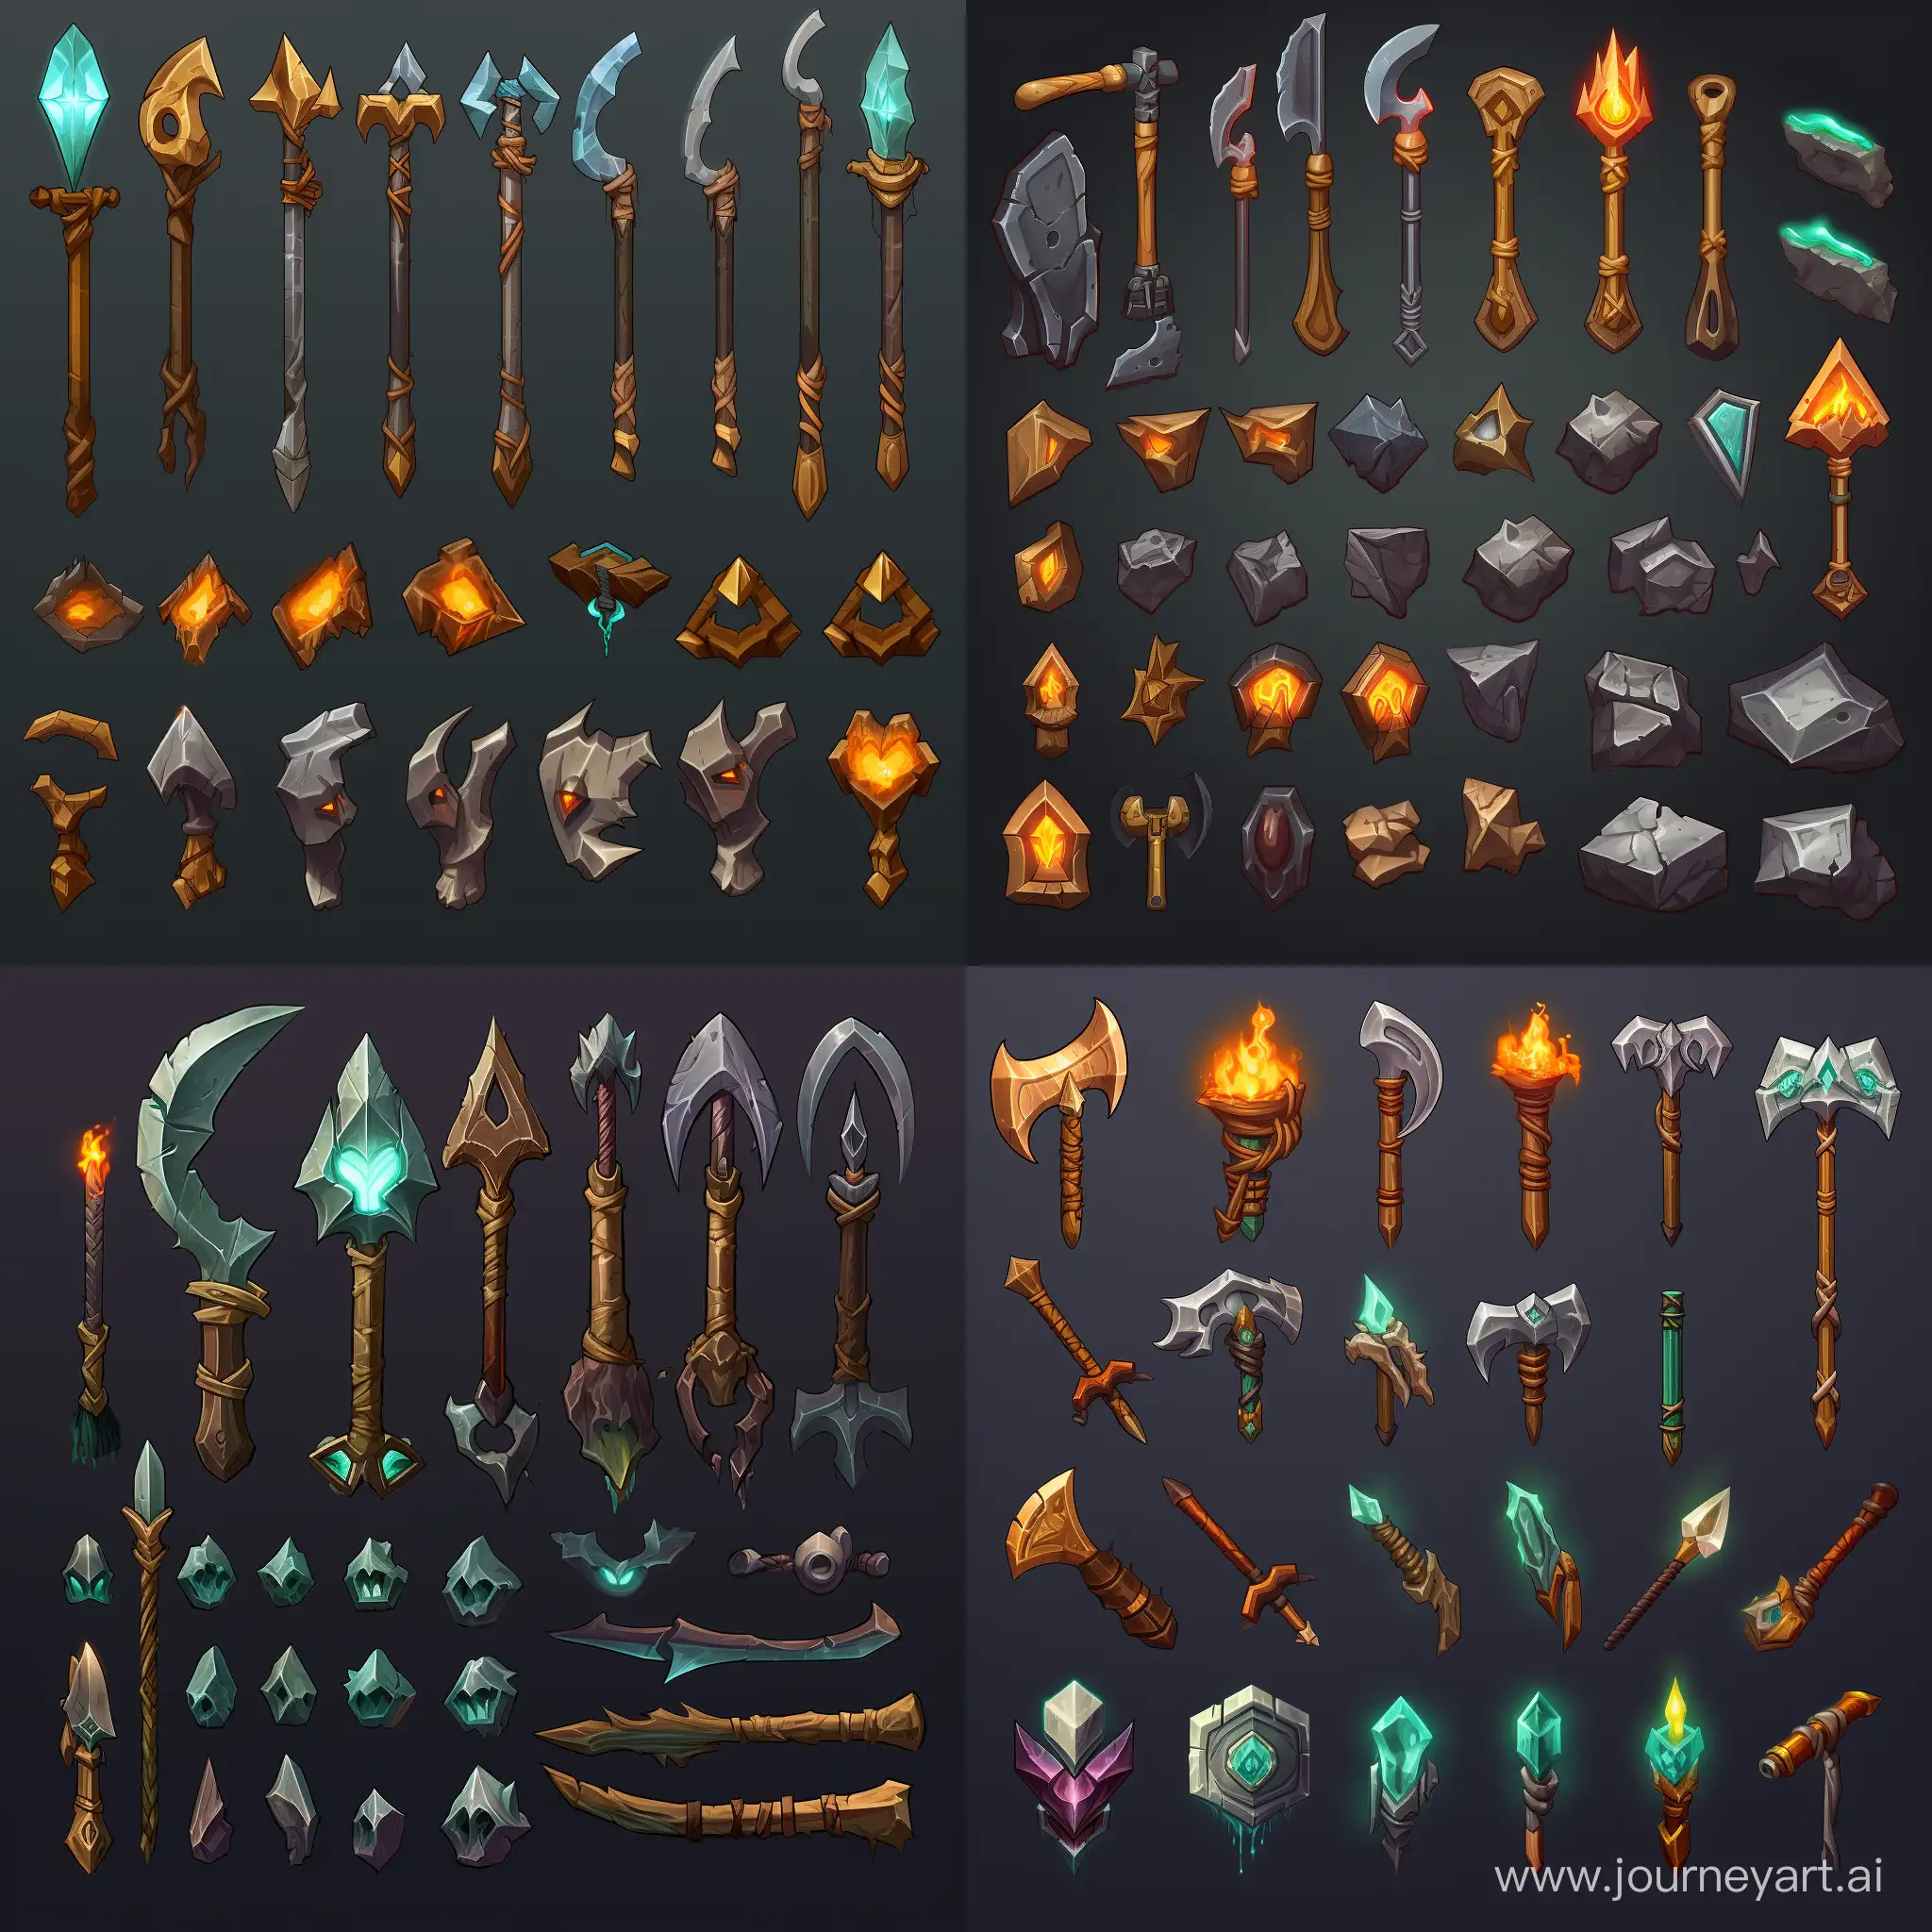 Fantasy-Item-Spritesheet-with-Crystal-Tools-and-Magical-Lighting-Effects